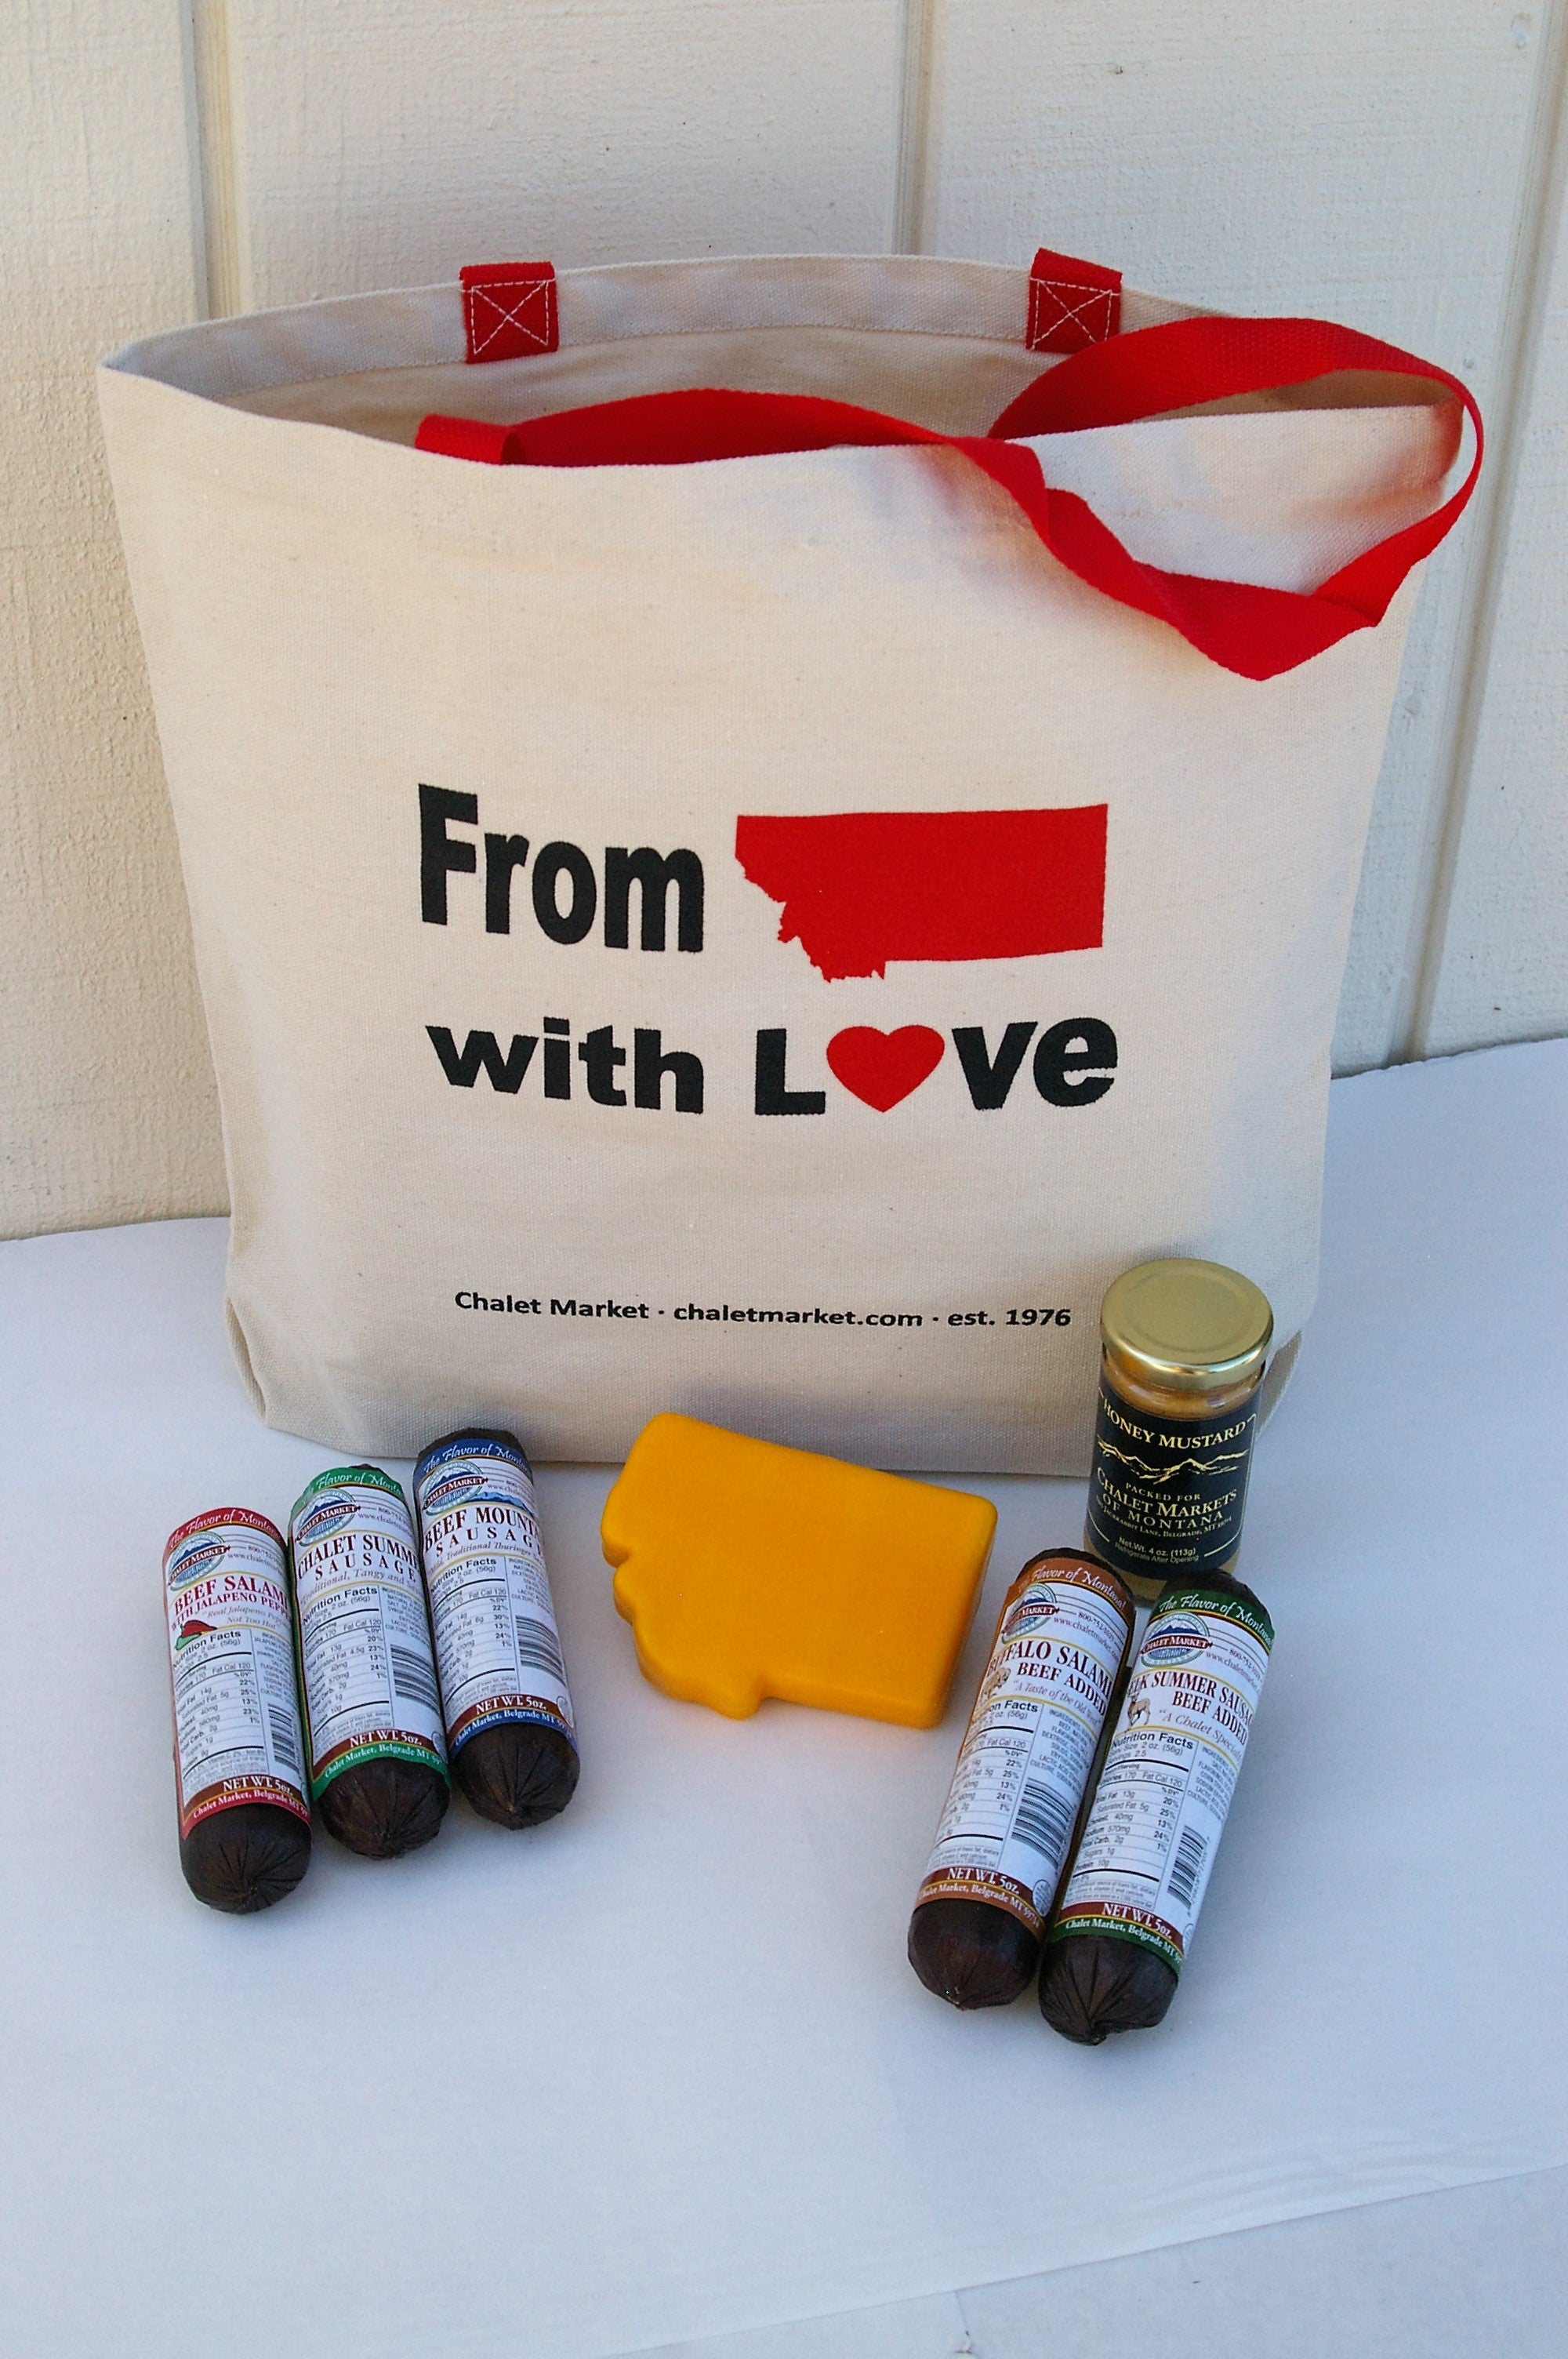 From Montana with love reusable tote bag gift #10.  5 5oz. Chalet Market sausages, MT shaped cheese and a 4 oz. honey mustard..  